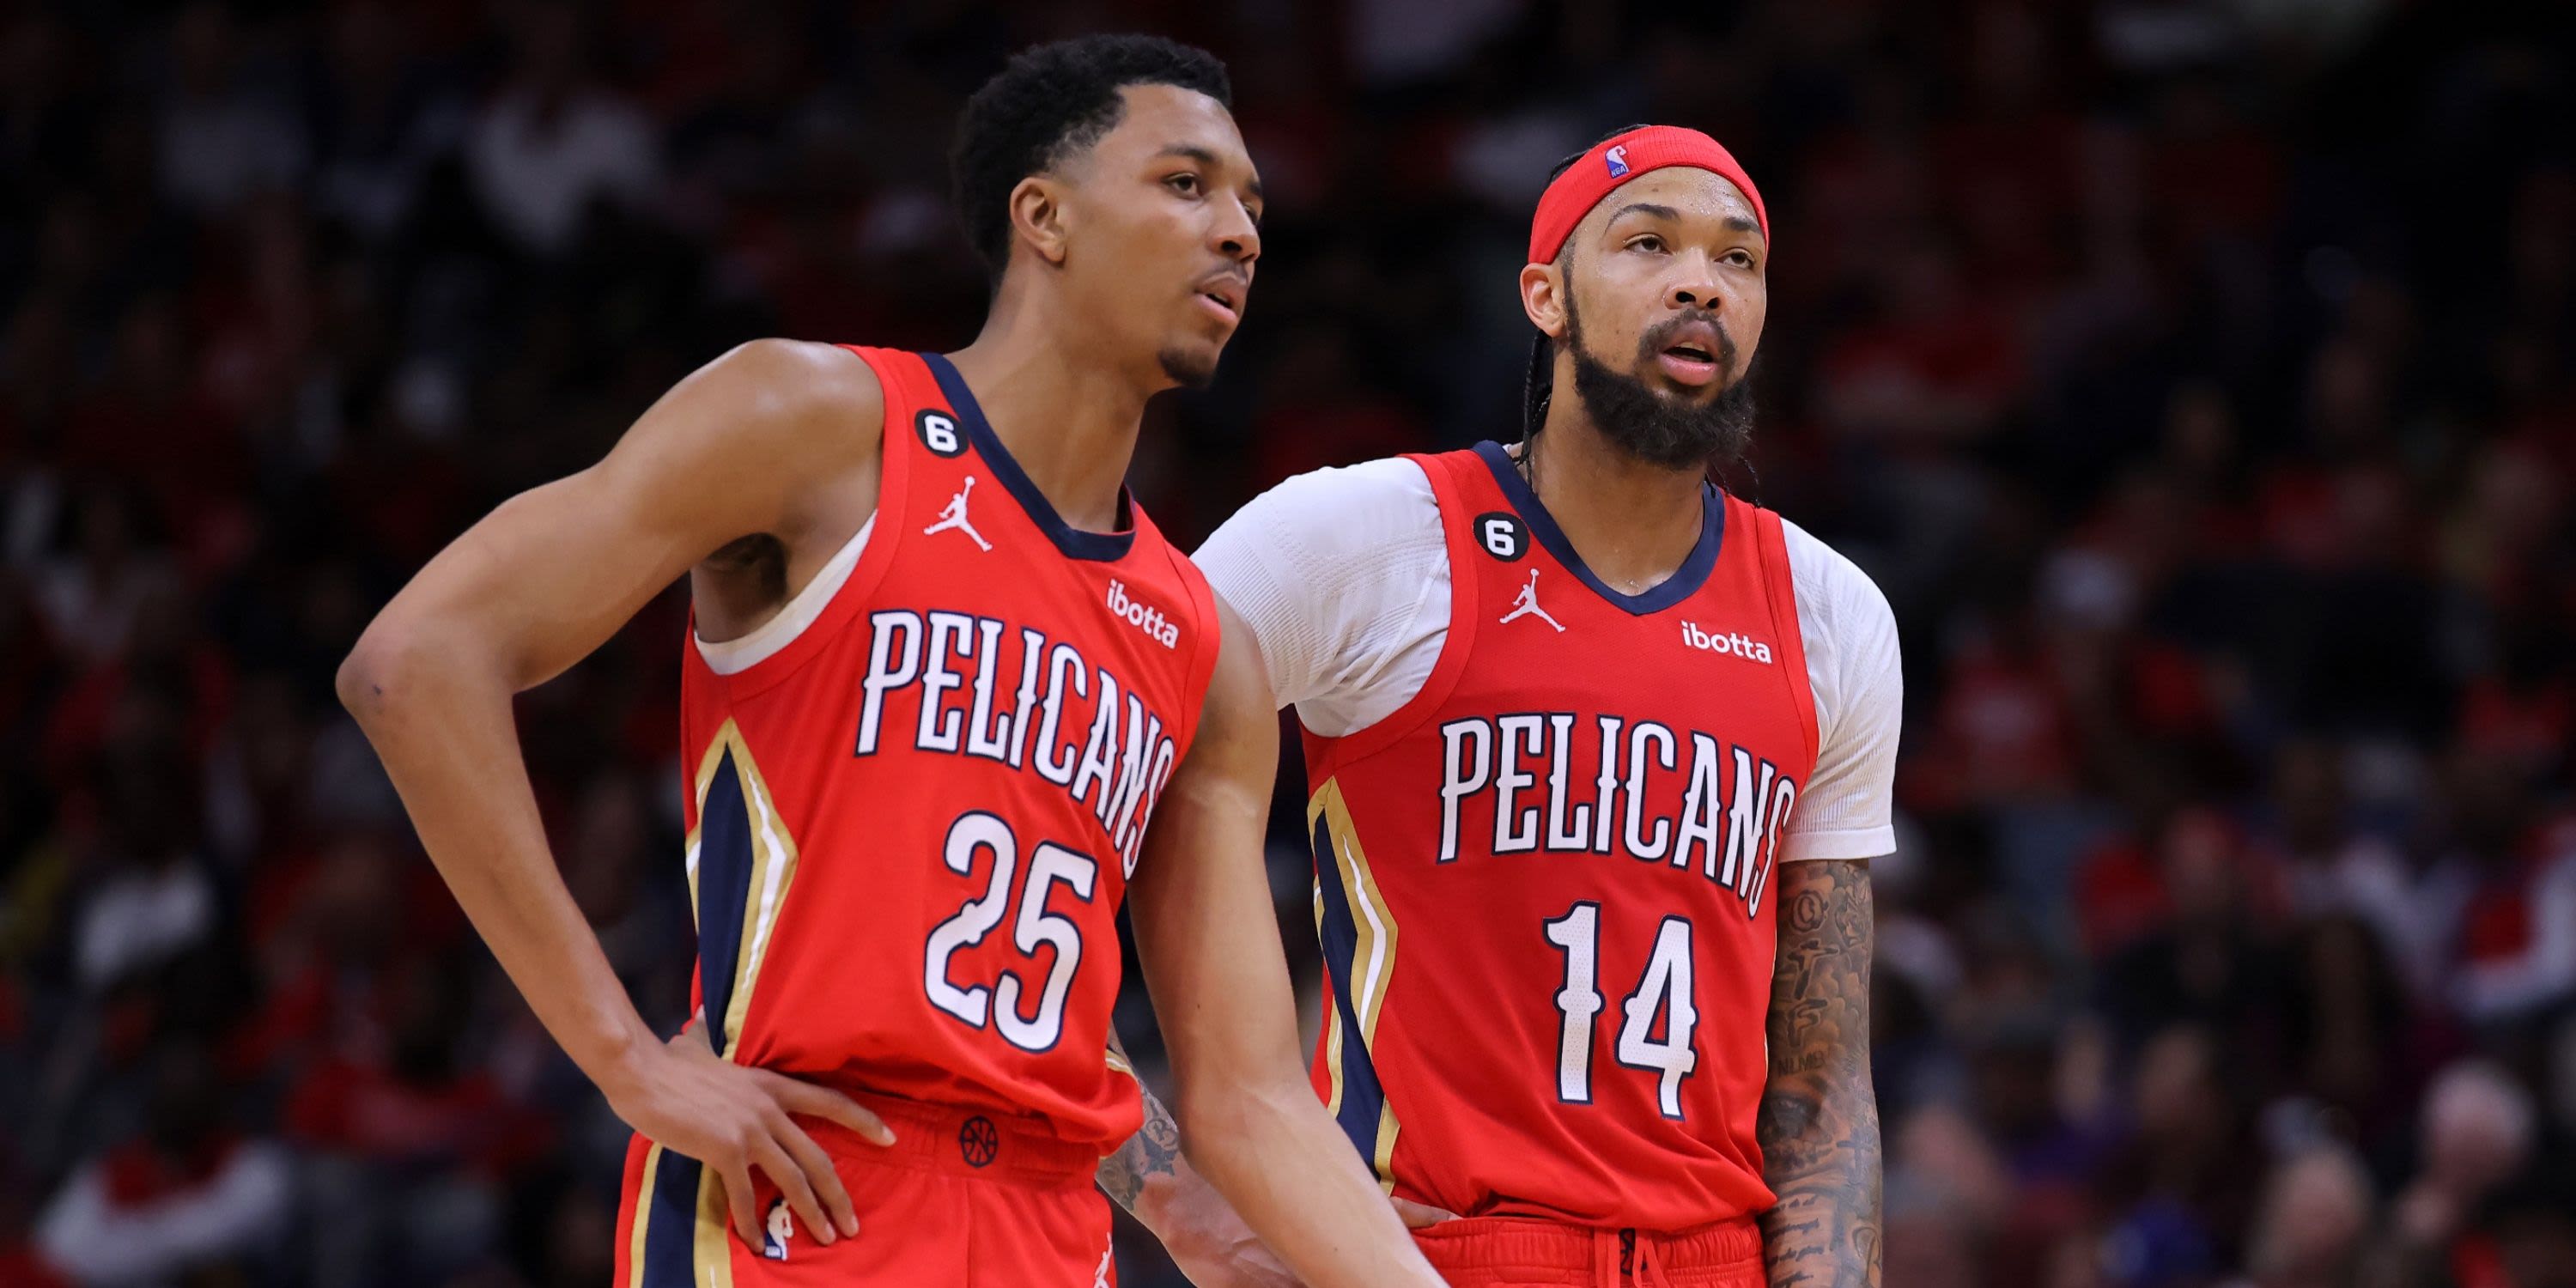 3 Likely Trade Candidates For the New Orleans Pelicans